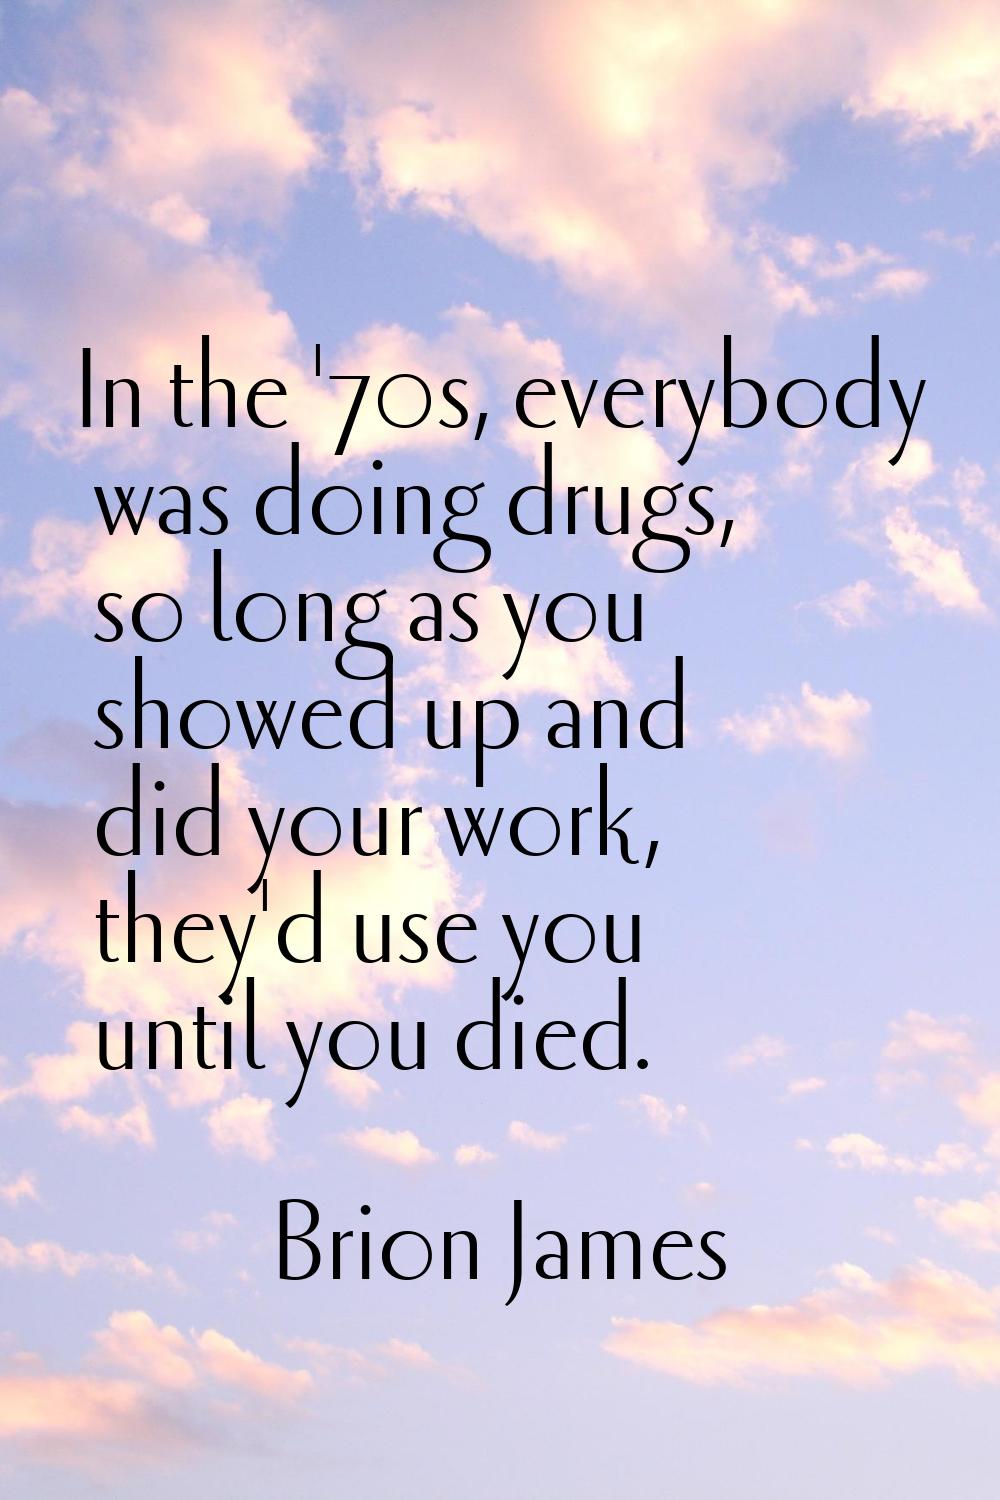 In the '70s, everybody was doing drugs, so long as you showed up and did your work, they'd use you 